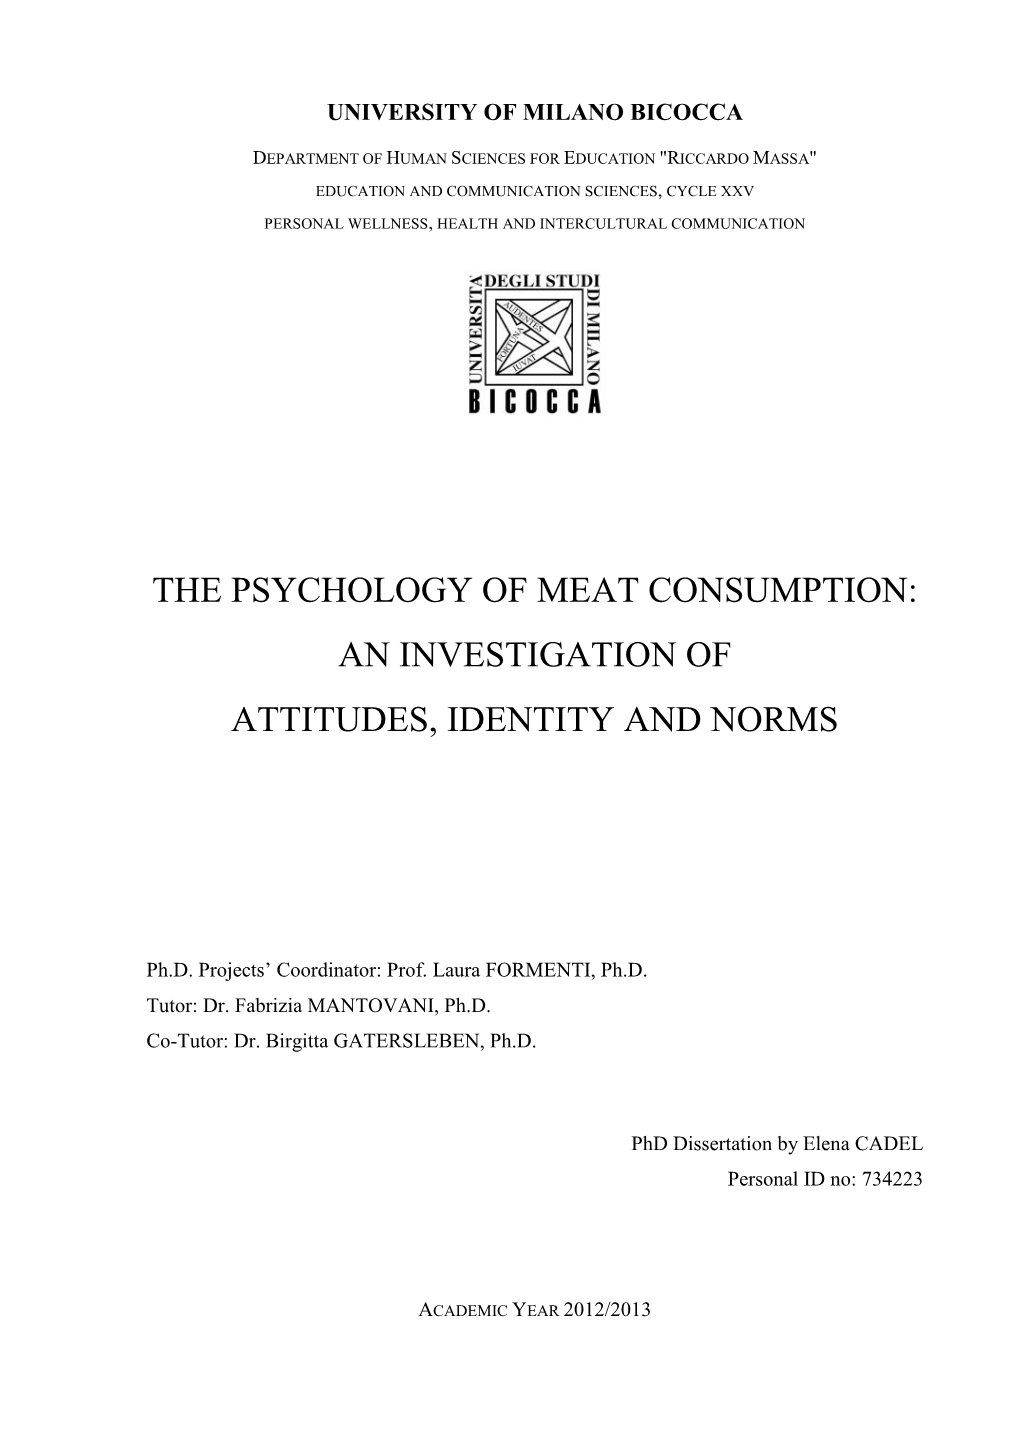 The Psychology of Meat Consumption: an Investigation of Attitudes, Identity and Norms